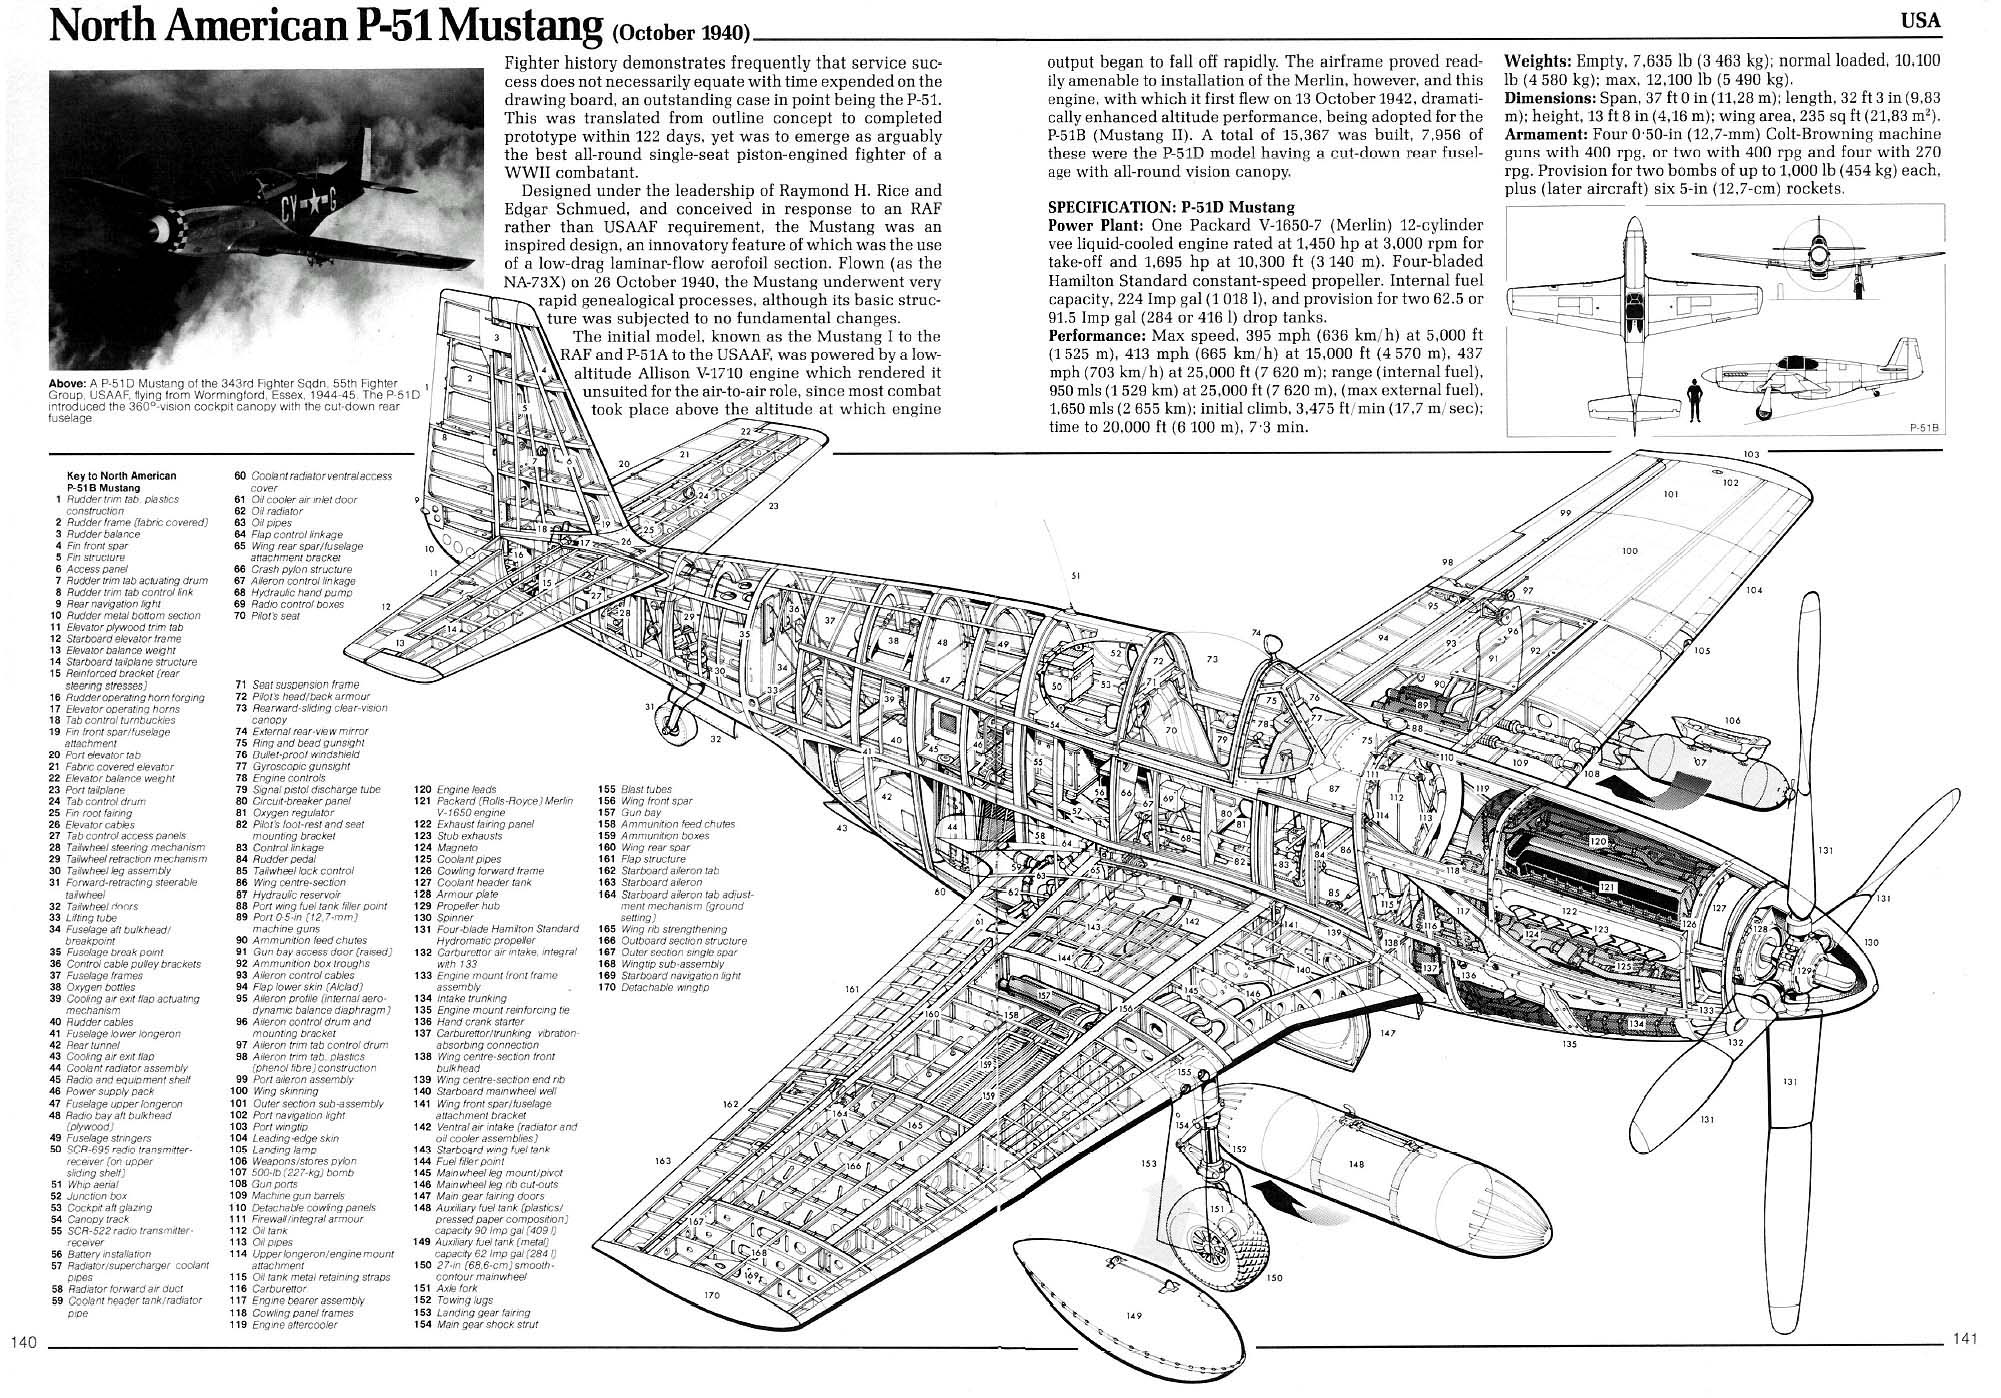 military, north american p 51 mustang, schematic, military aircraft